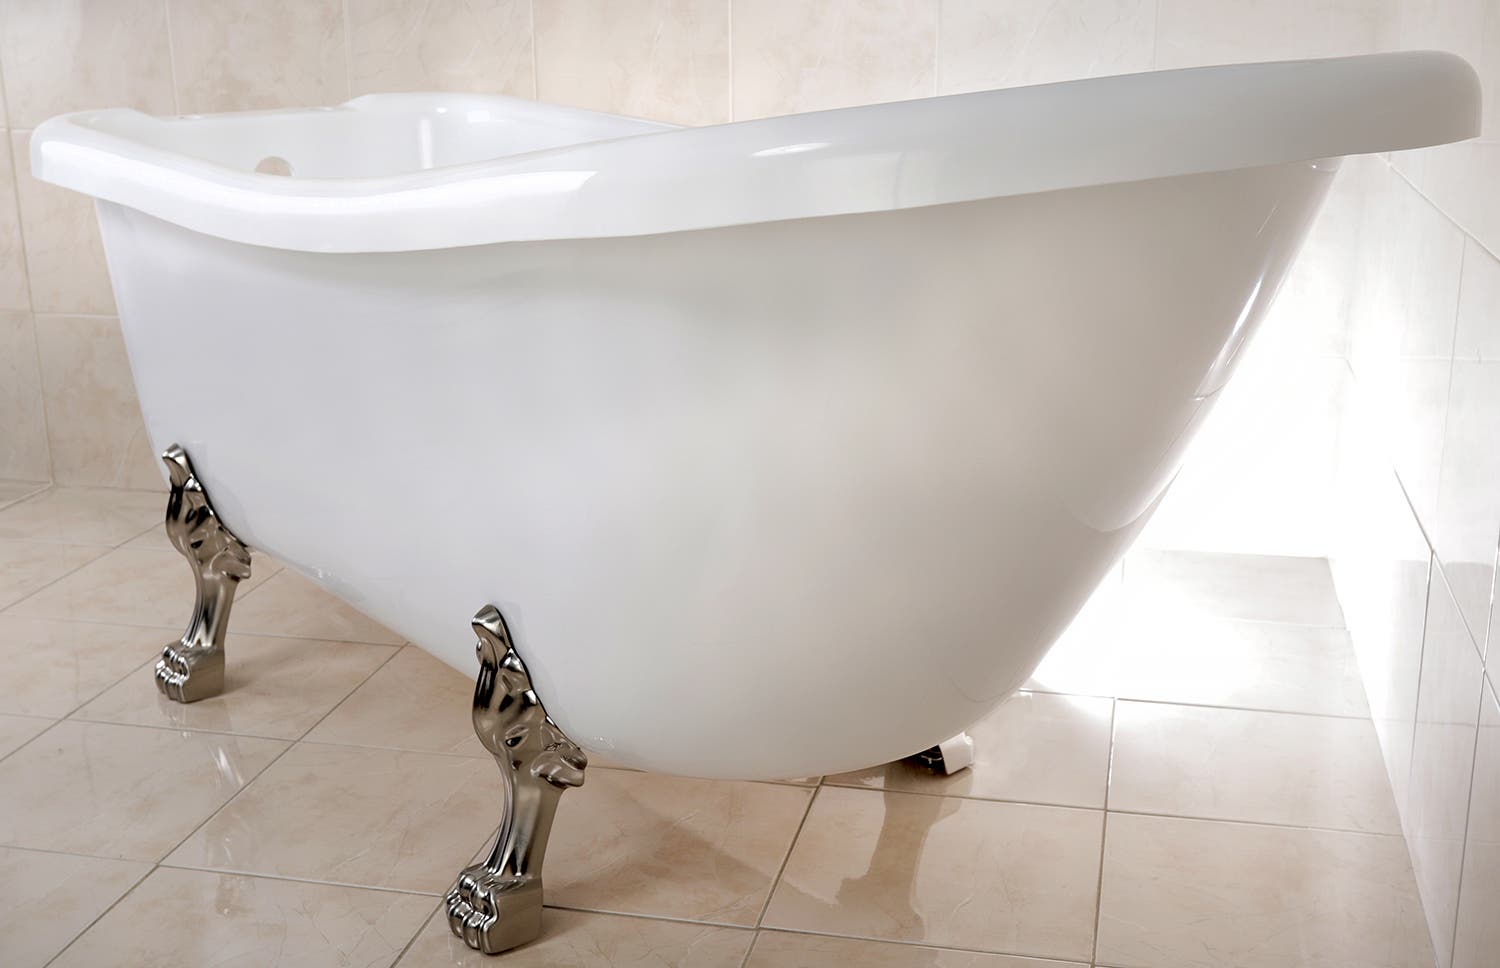 Tips for choosing the right clawfoot tub to suit your bathroom